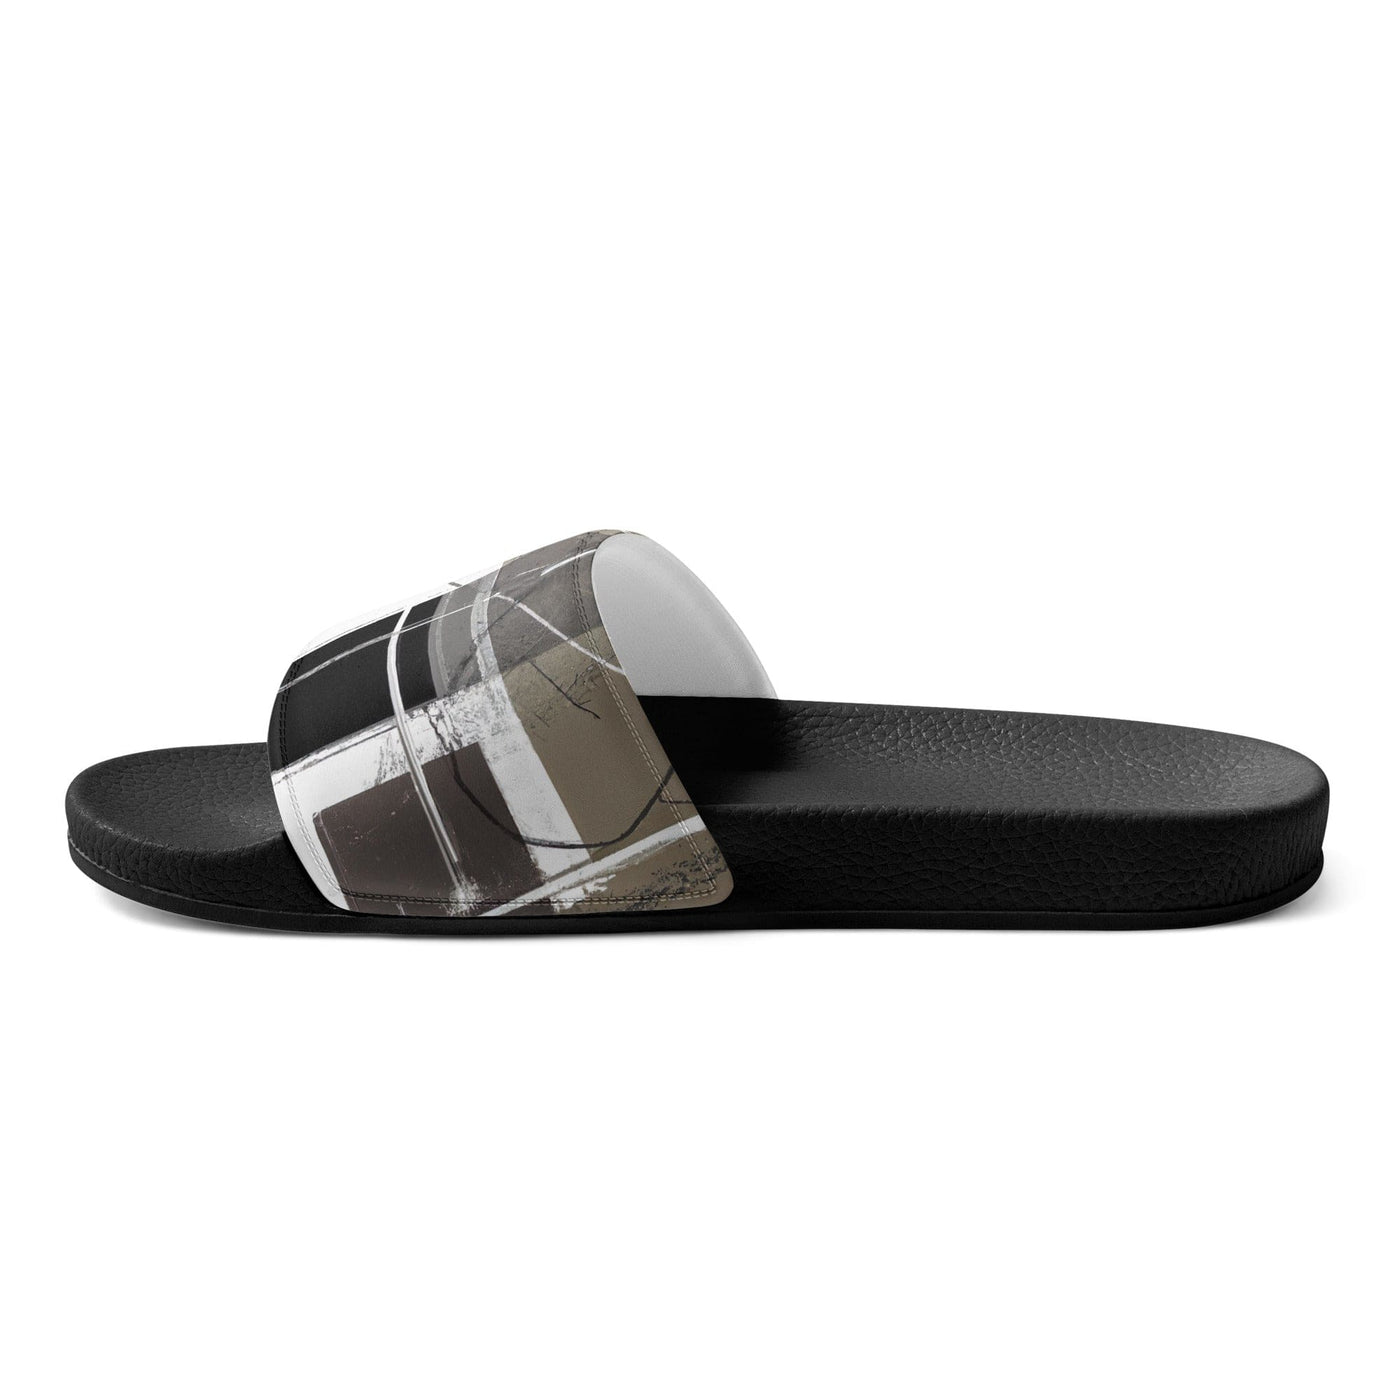 Mens Slide Sandals Abstract Black Brown Beige Geometric Contemporary - Mens